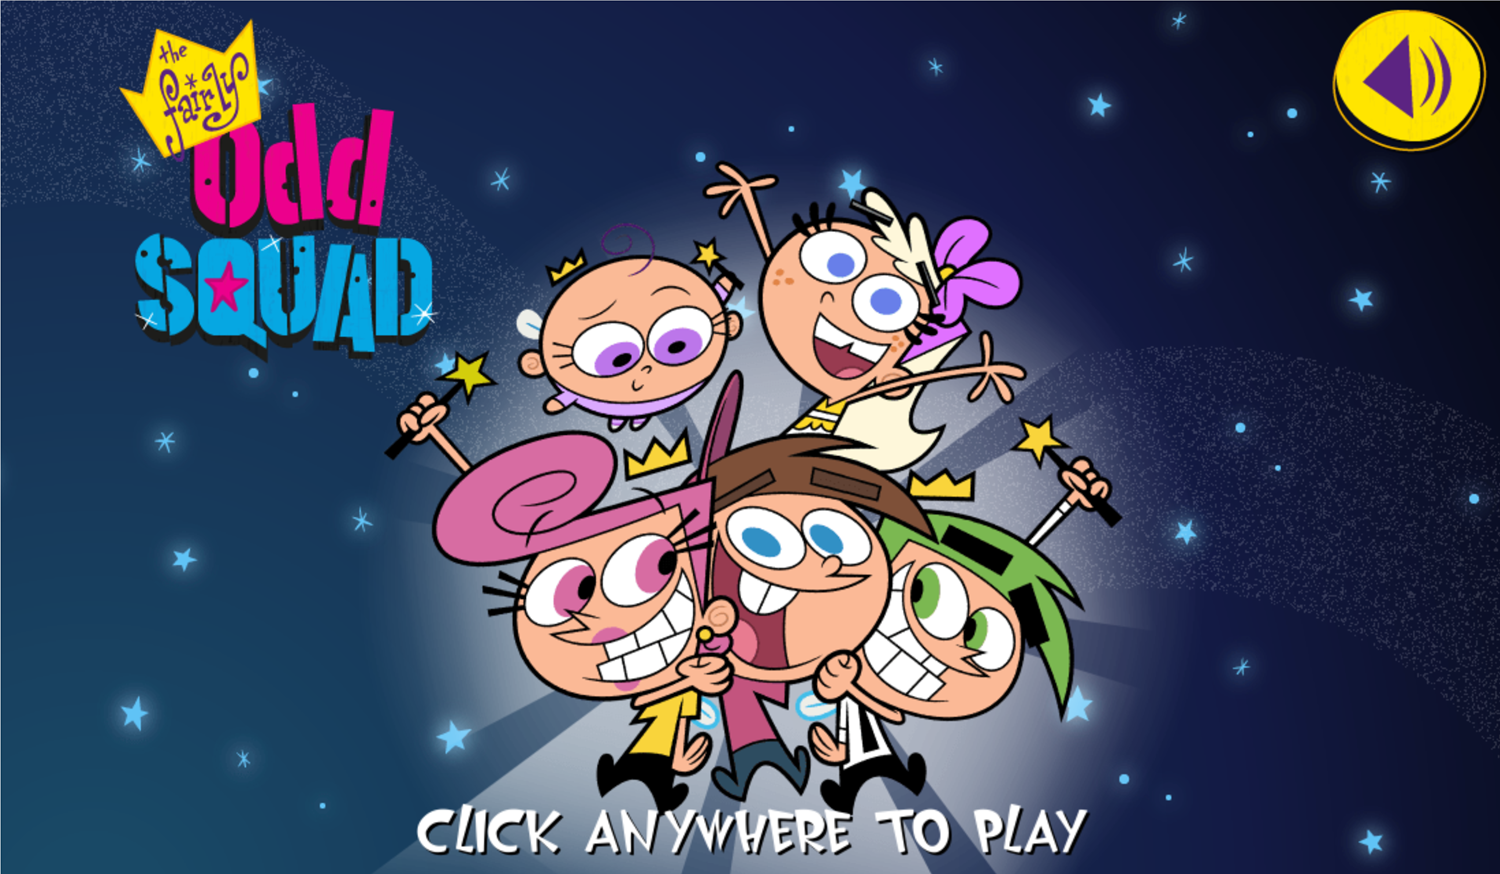 The Fairly OddParents The Fairly odd Squad Game Welcome Screen Screenshot.